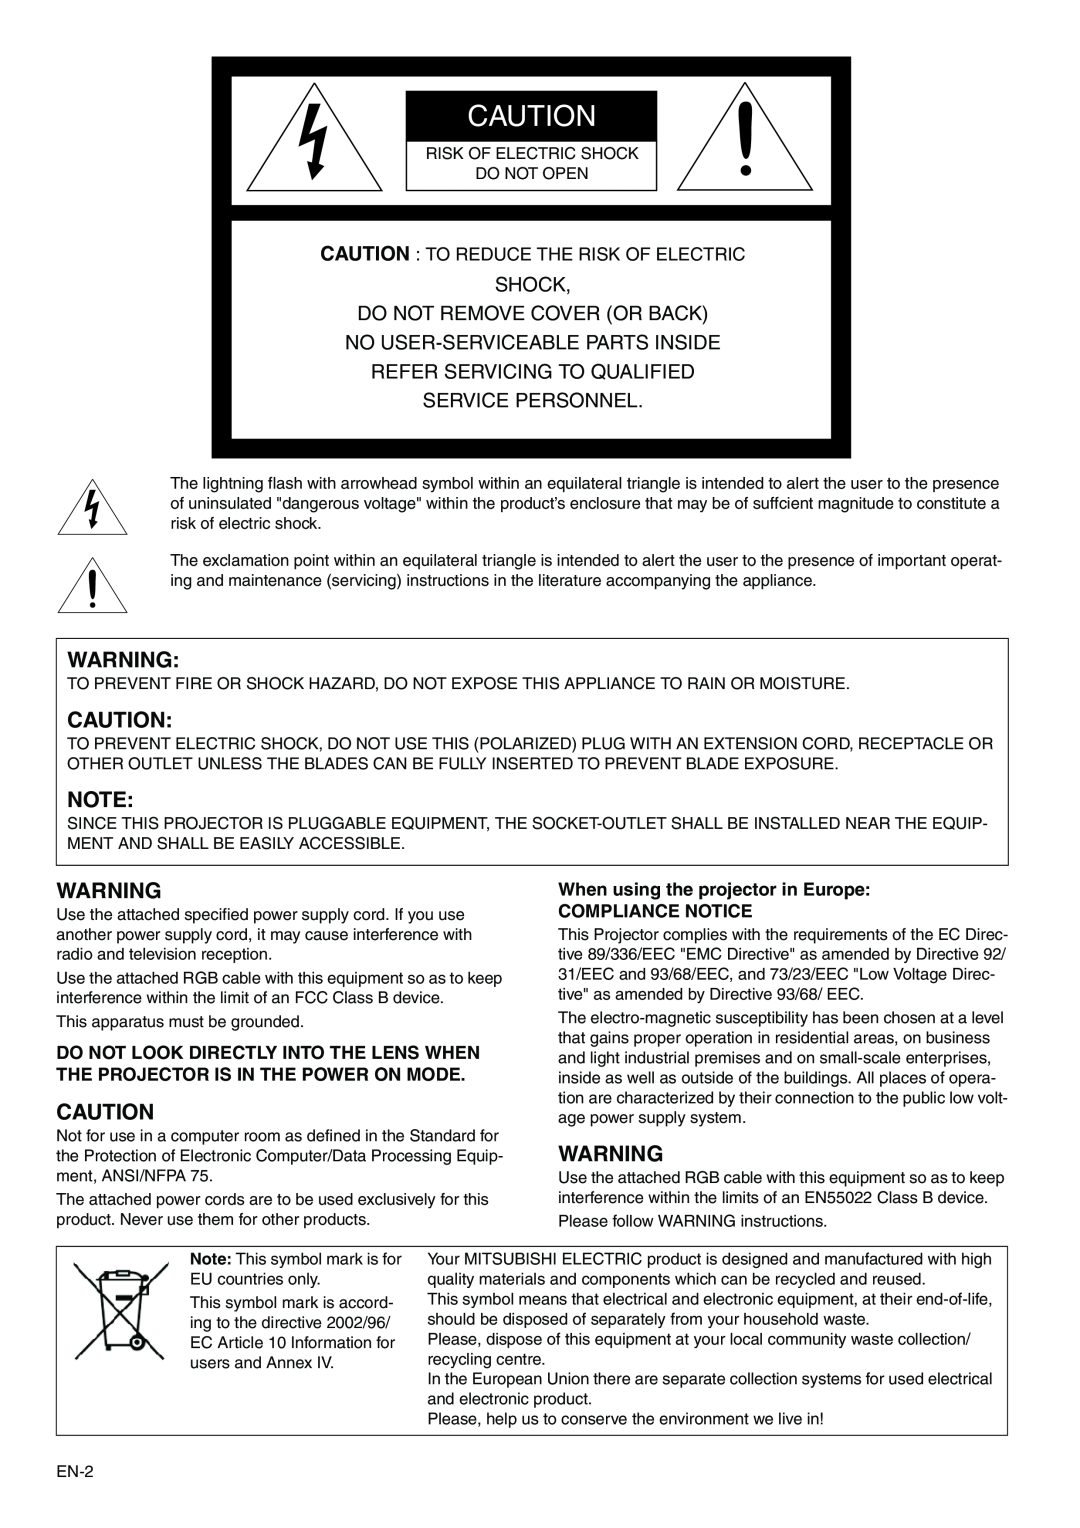 Mitsubishi Electronics XD110 Caution To Reduce The Risk Of Electric, When using the projector in Europe COMPLIANCE NOTICE 